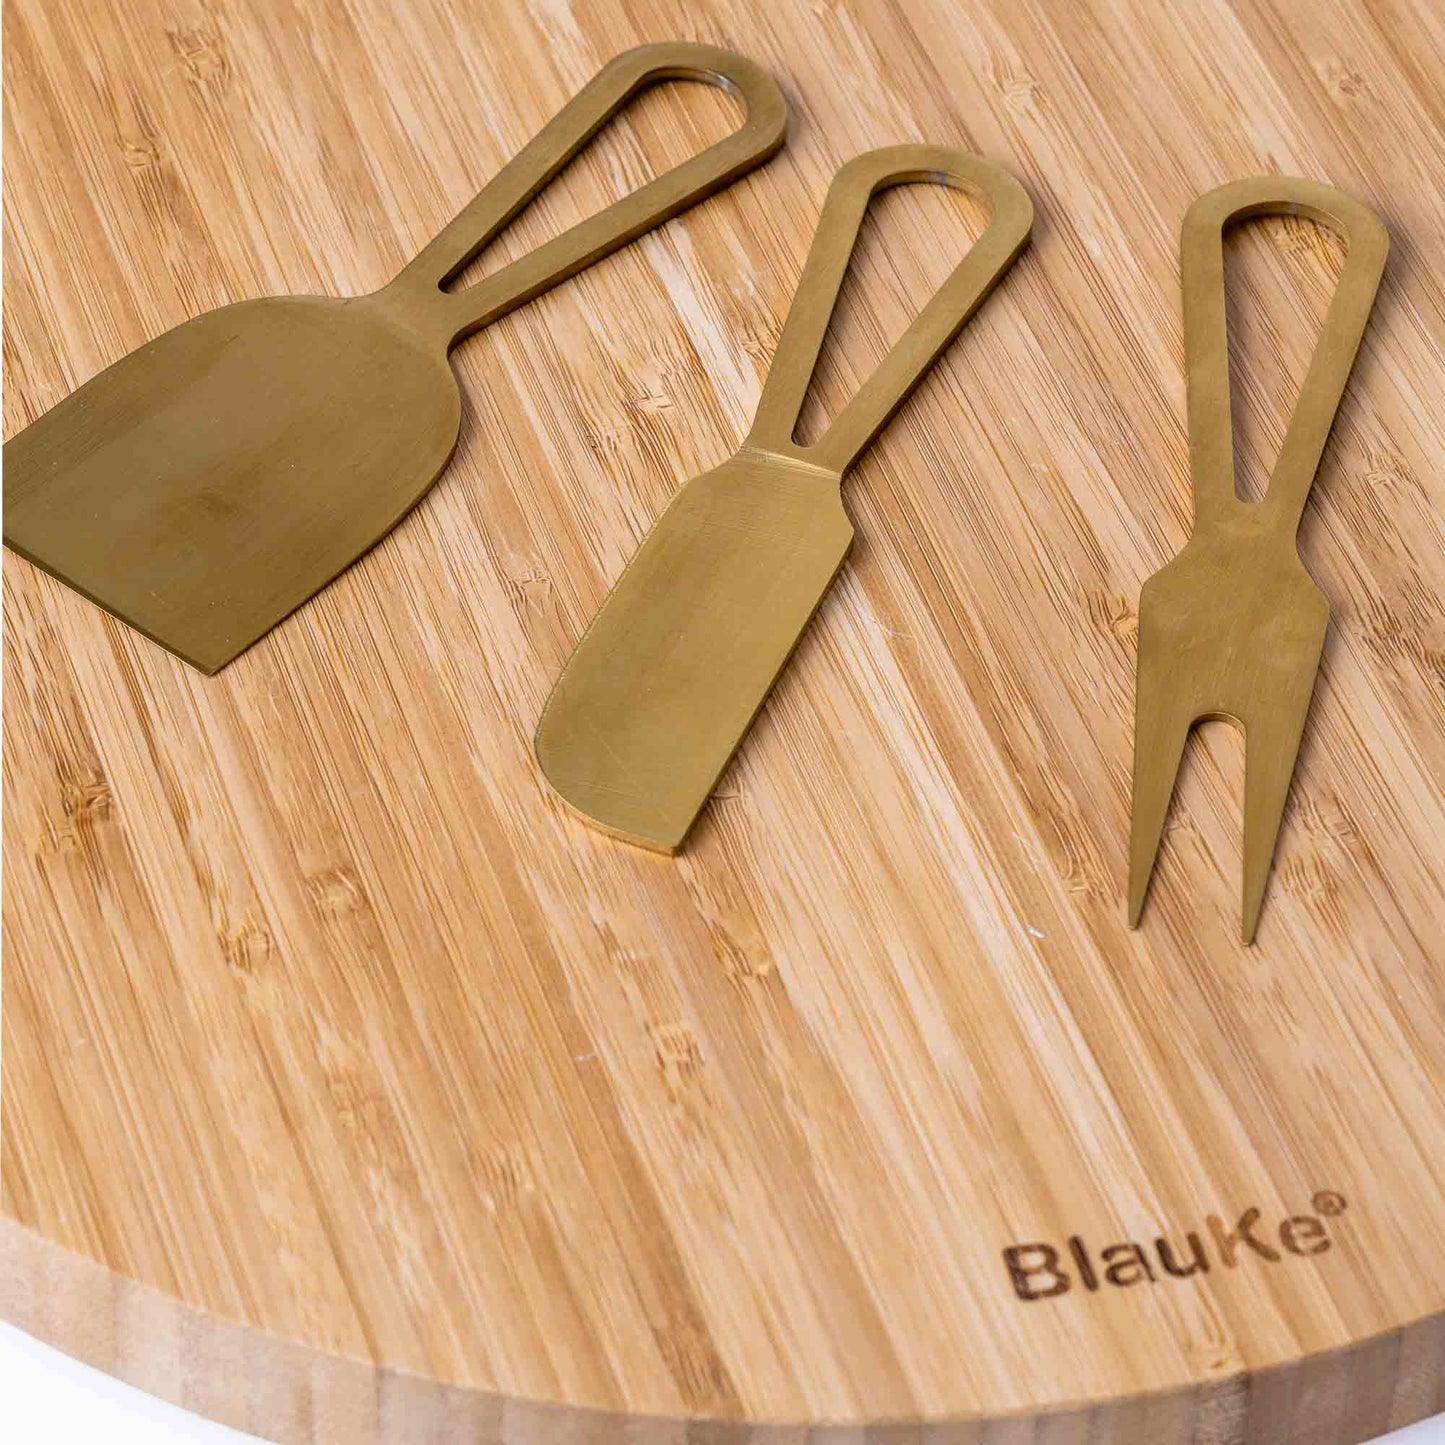 Bamboo Cheese Board and Knife Set with Magnetic Cutlery Storage - 13 inch Round Charcuterie Board-11